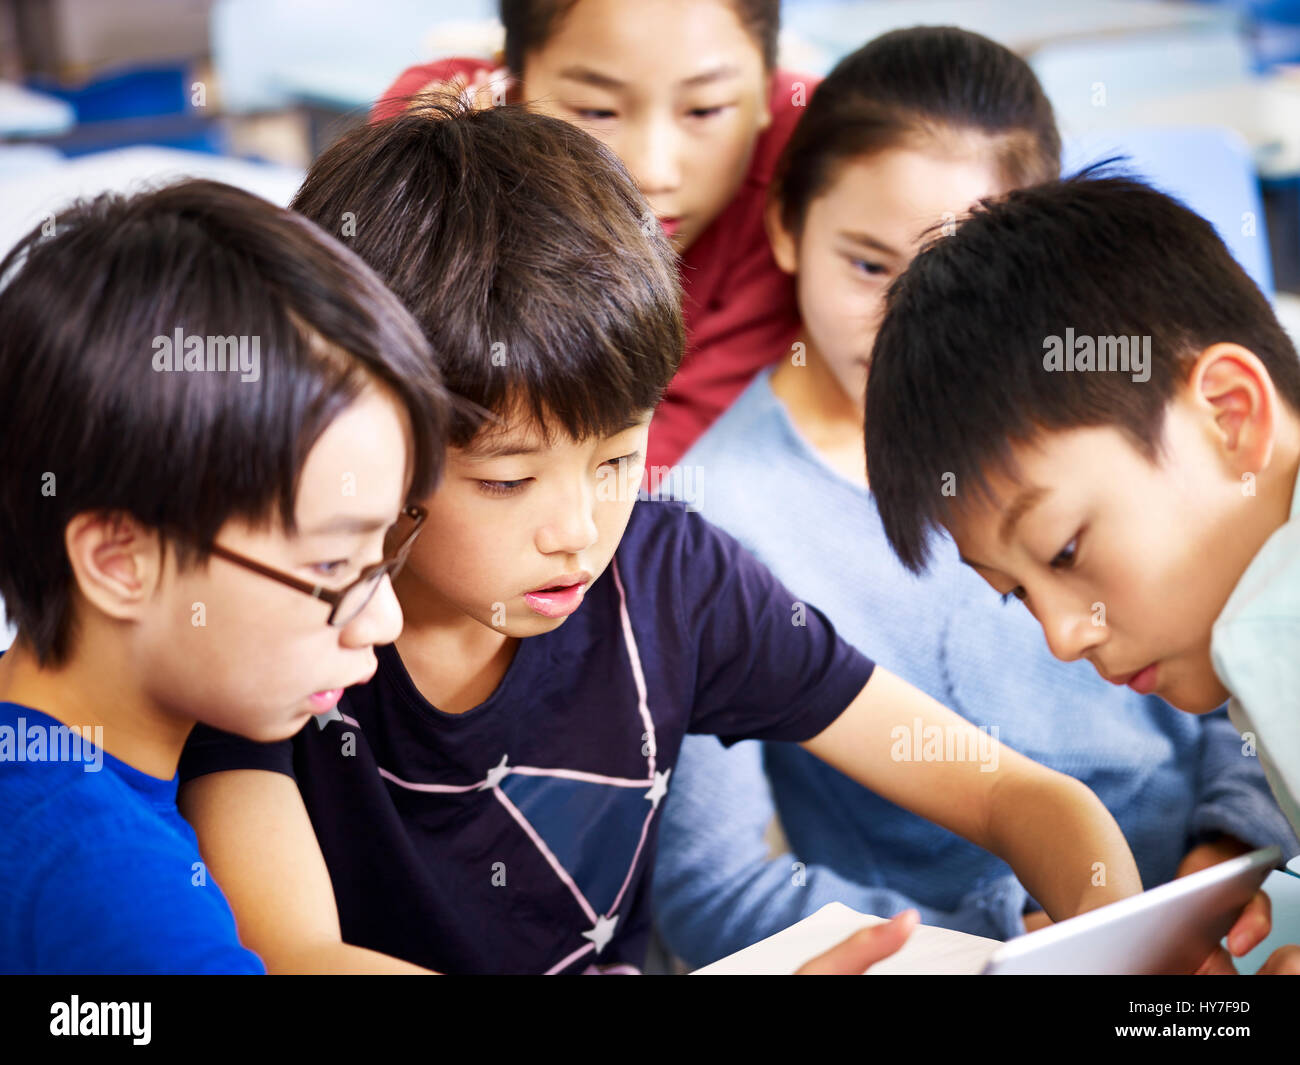 group of asian elementary schoolchildren playing game using tablet together. Stock Photo